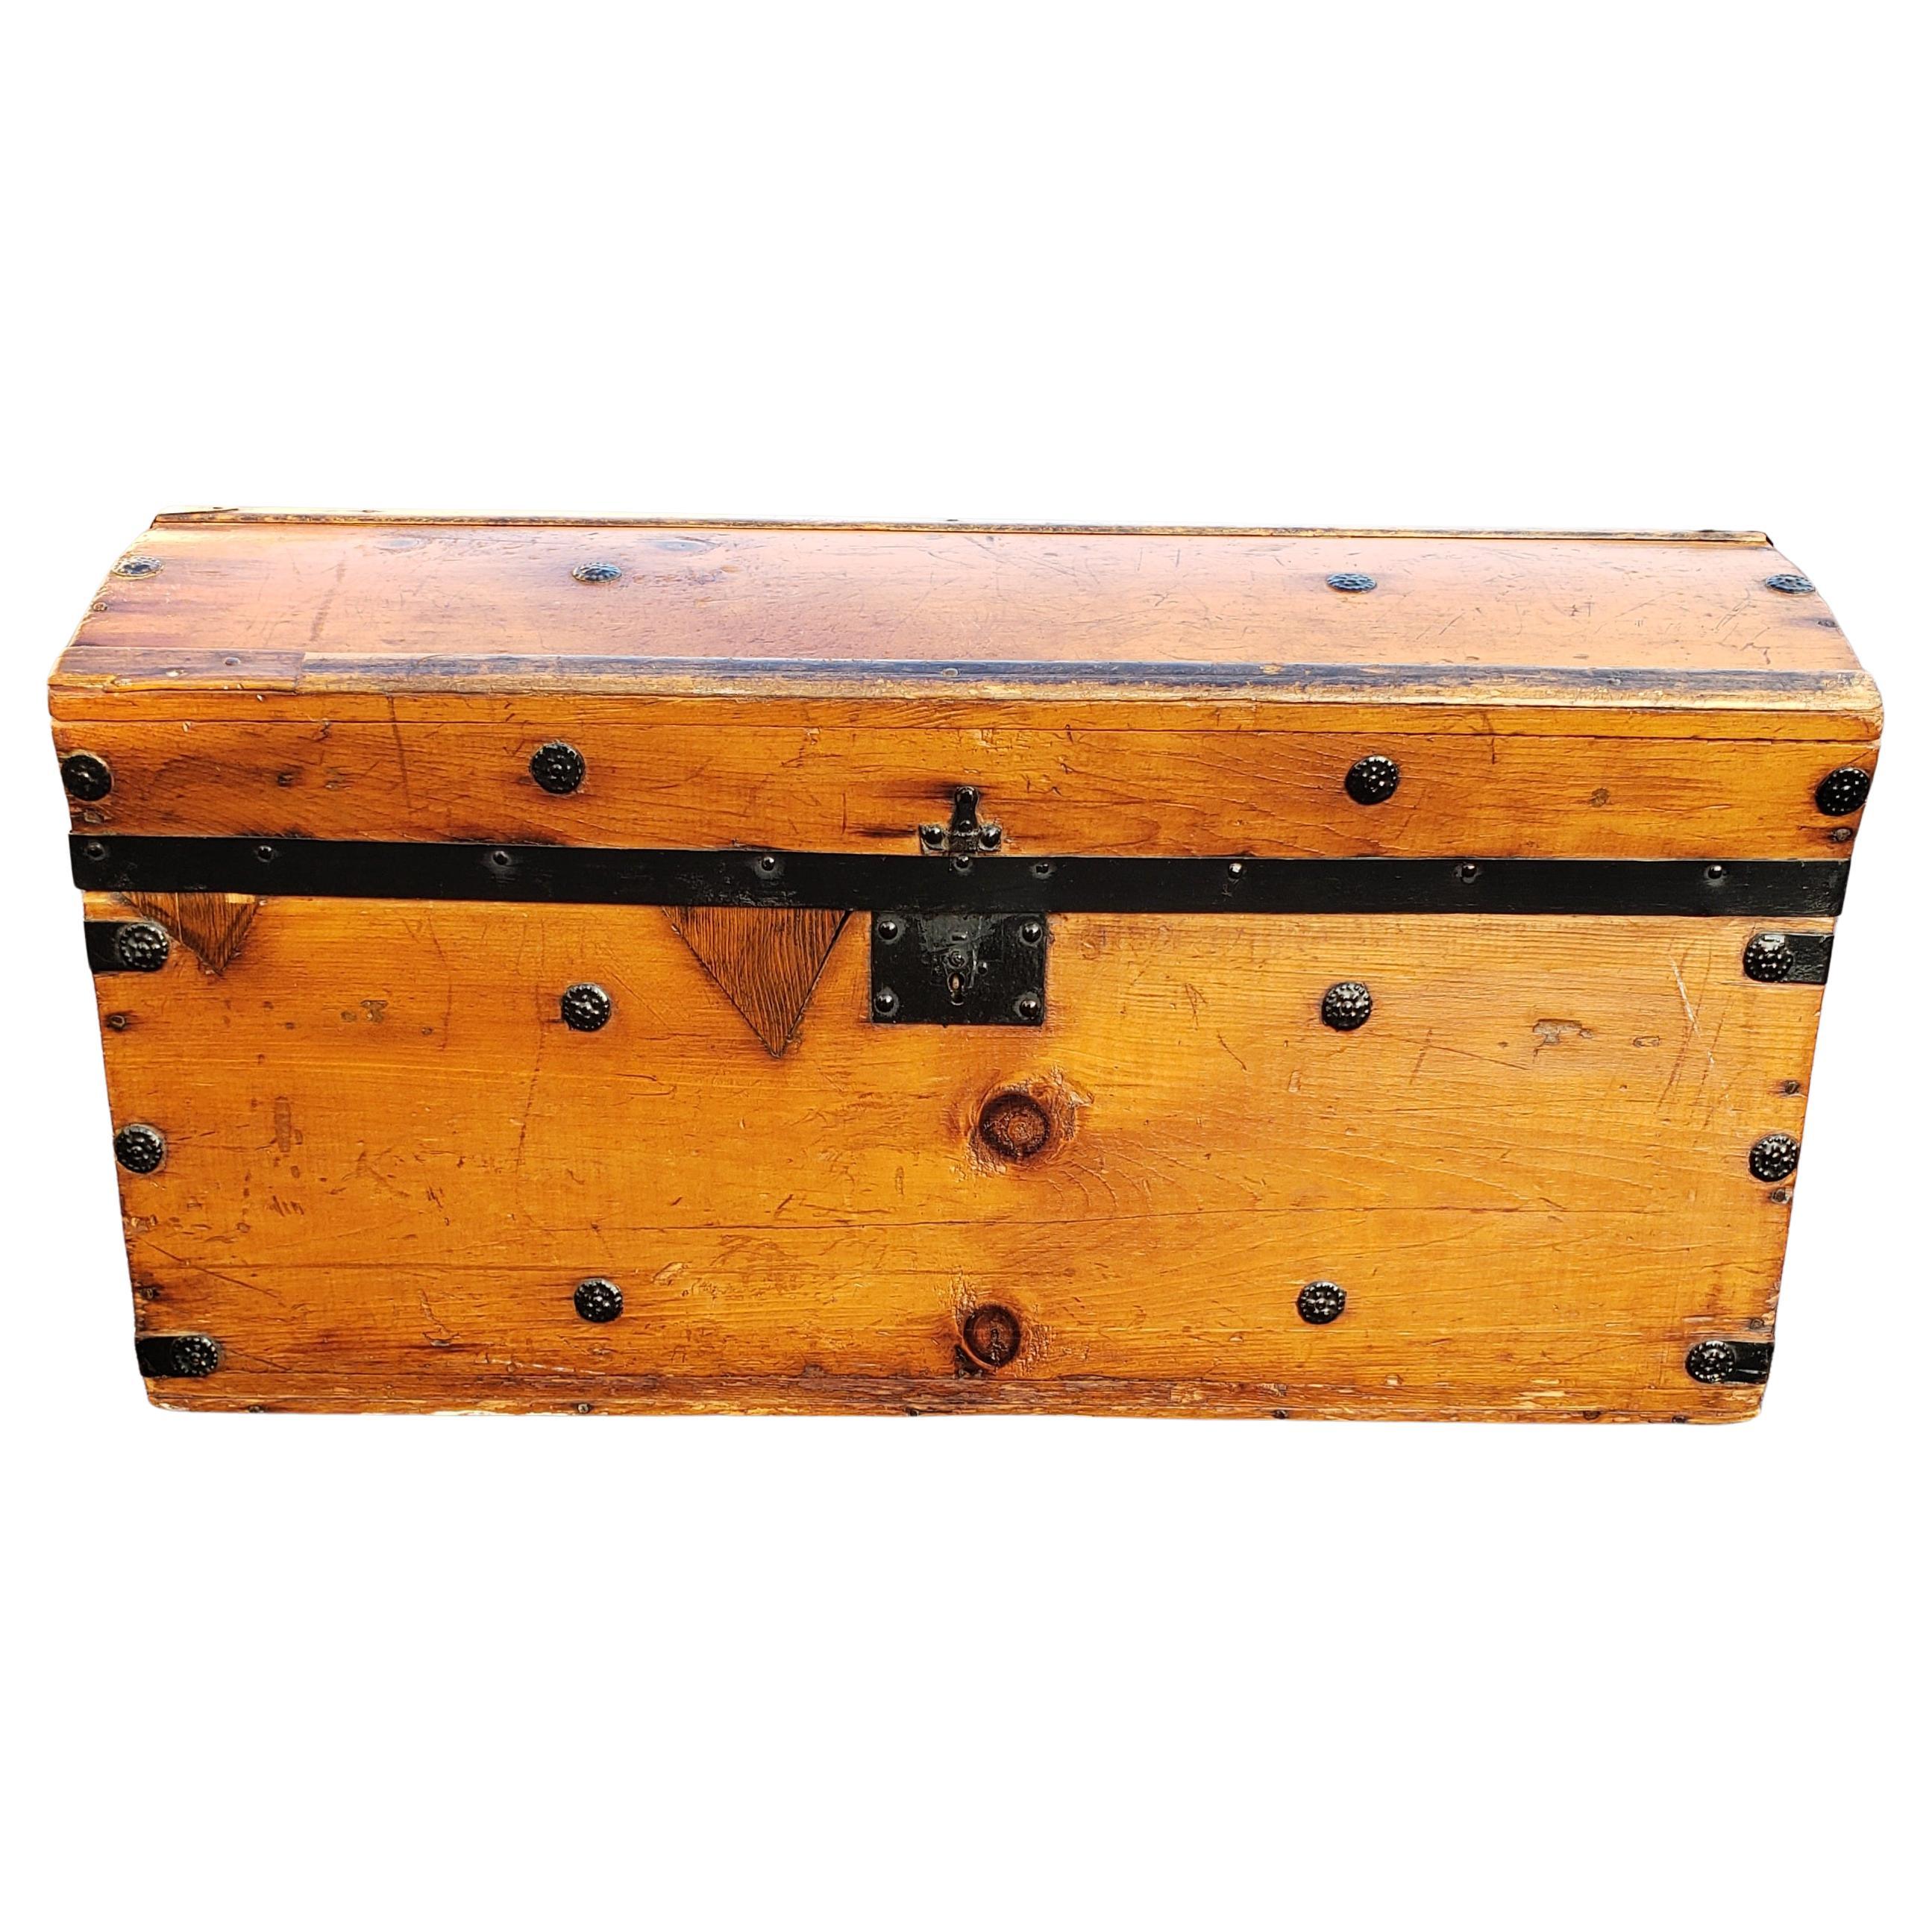 Vintage American Pine Trunk with Solid Wooden Handles, circa 1960s For Sale